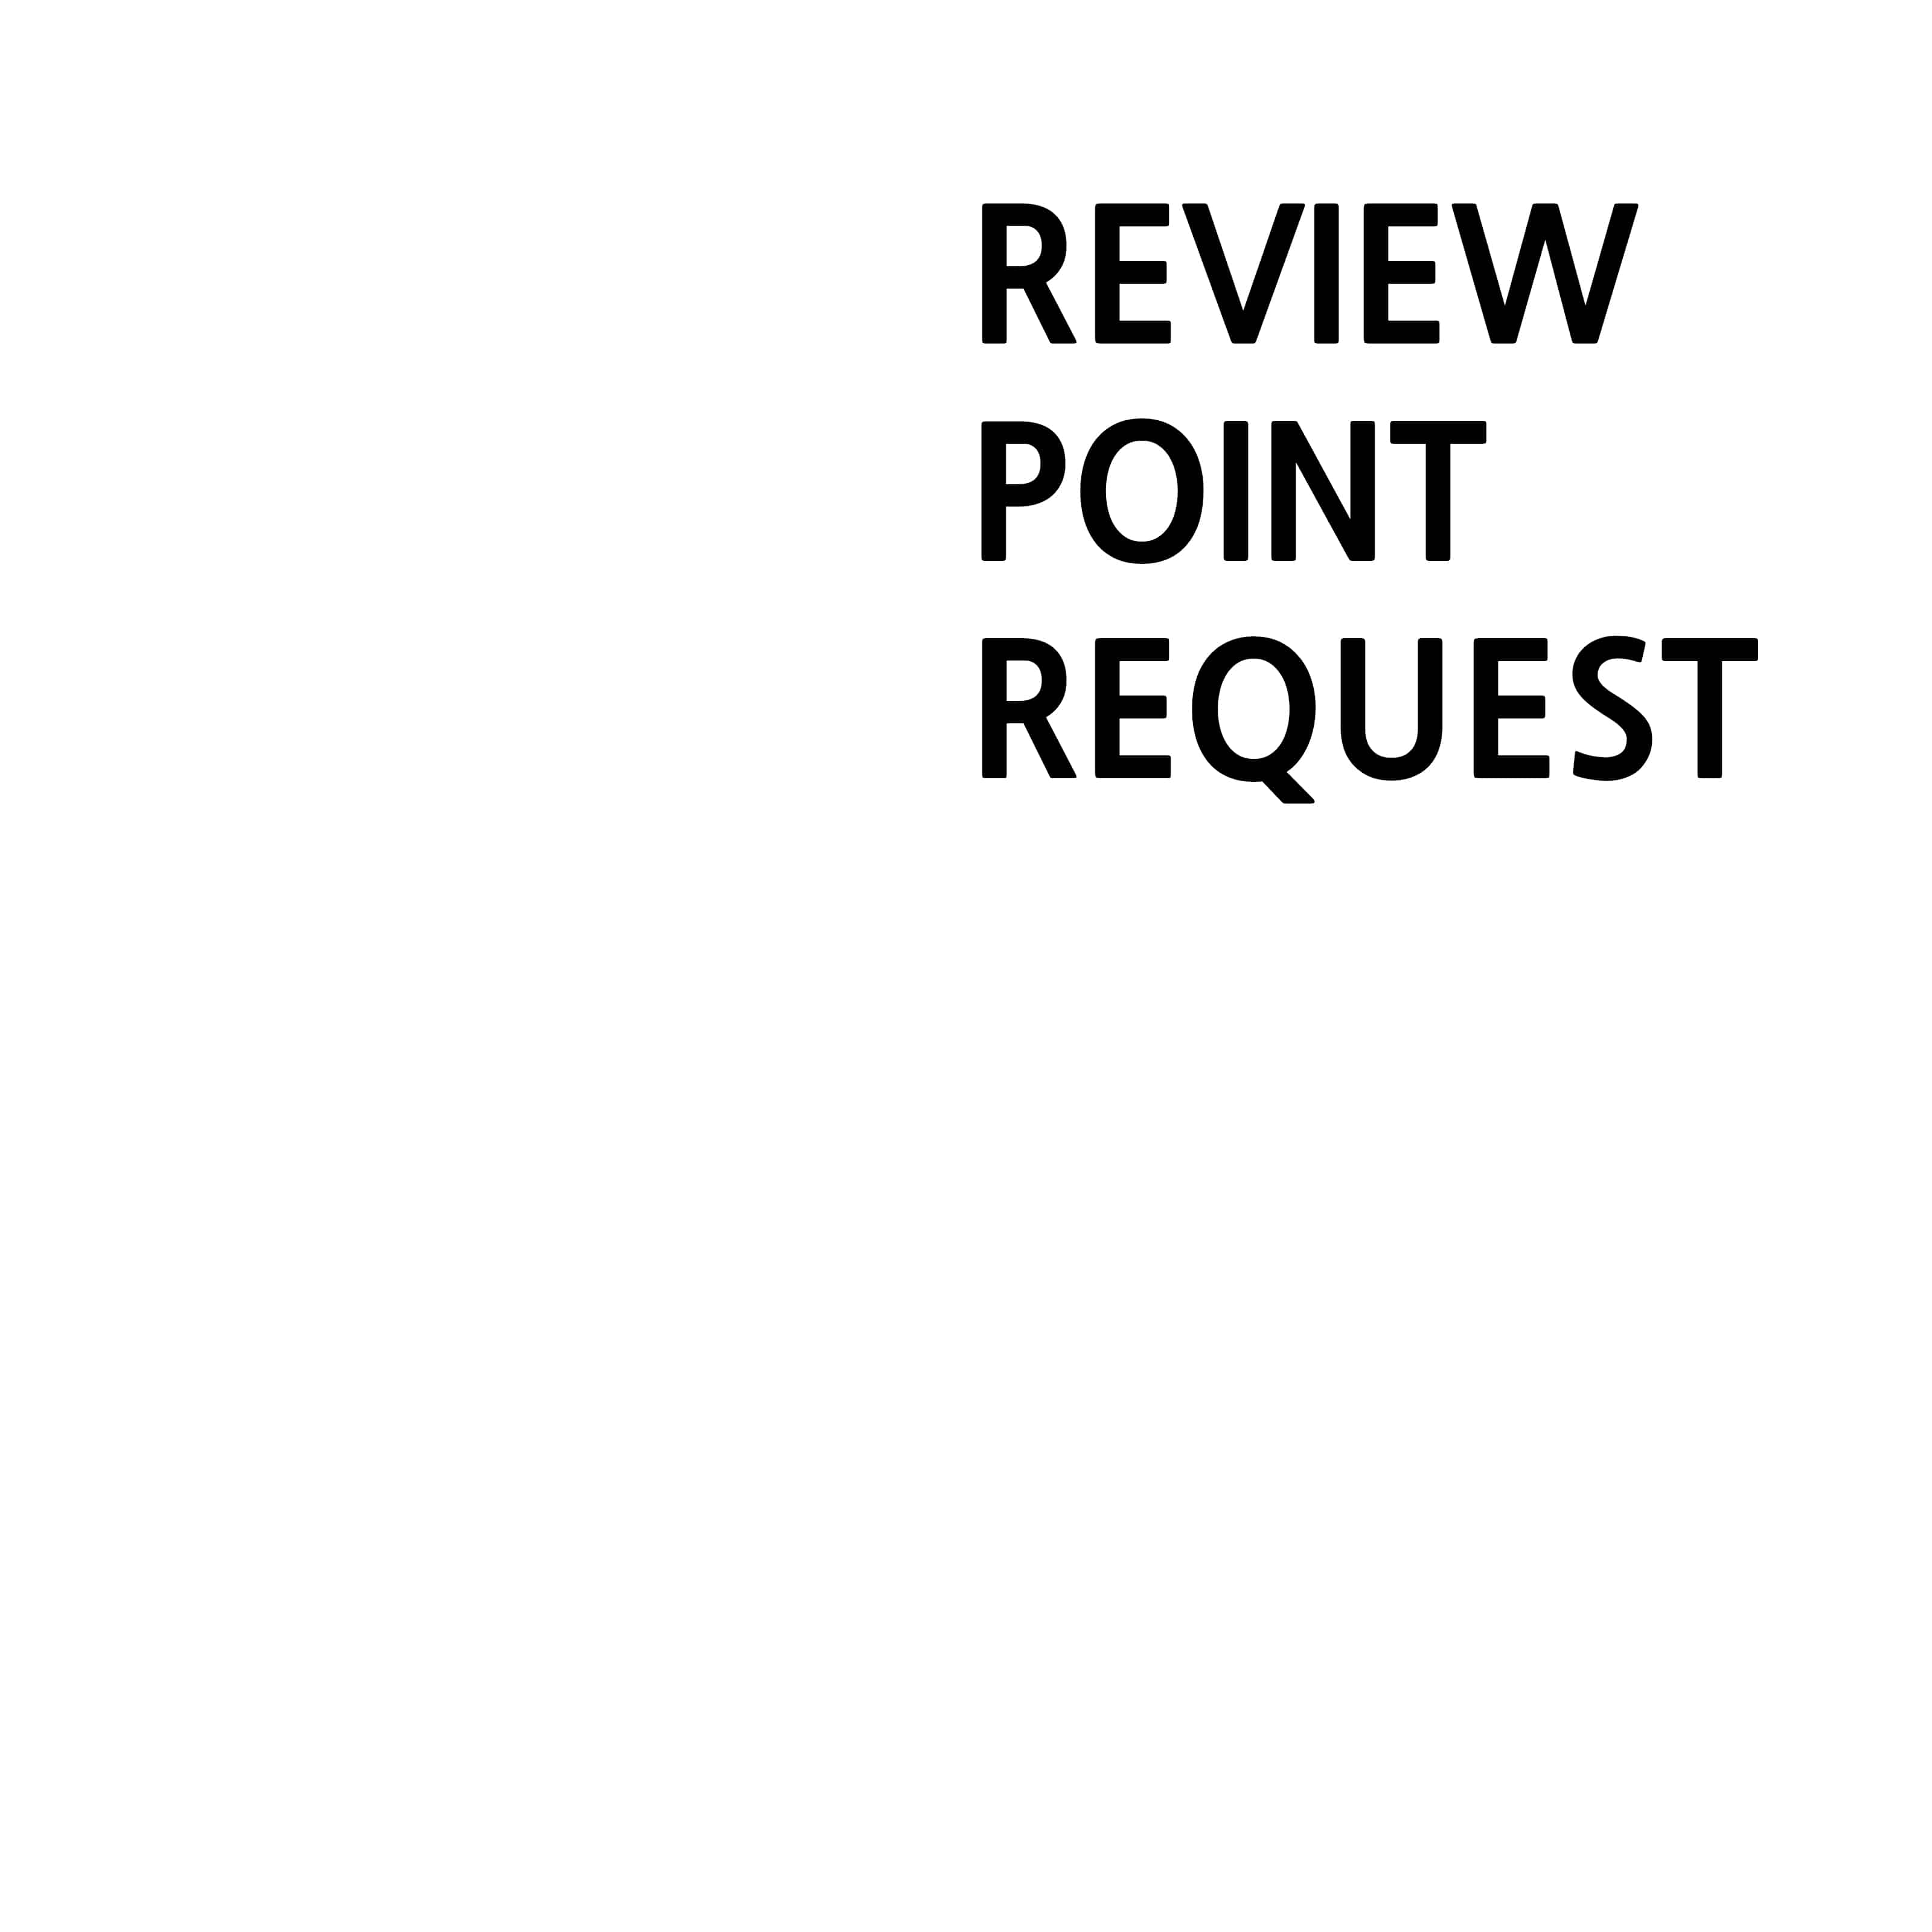 REVIEW POINT REQUEST